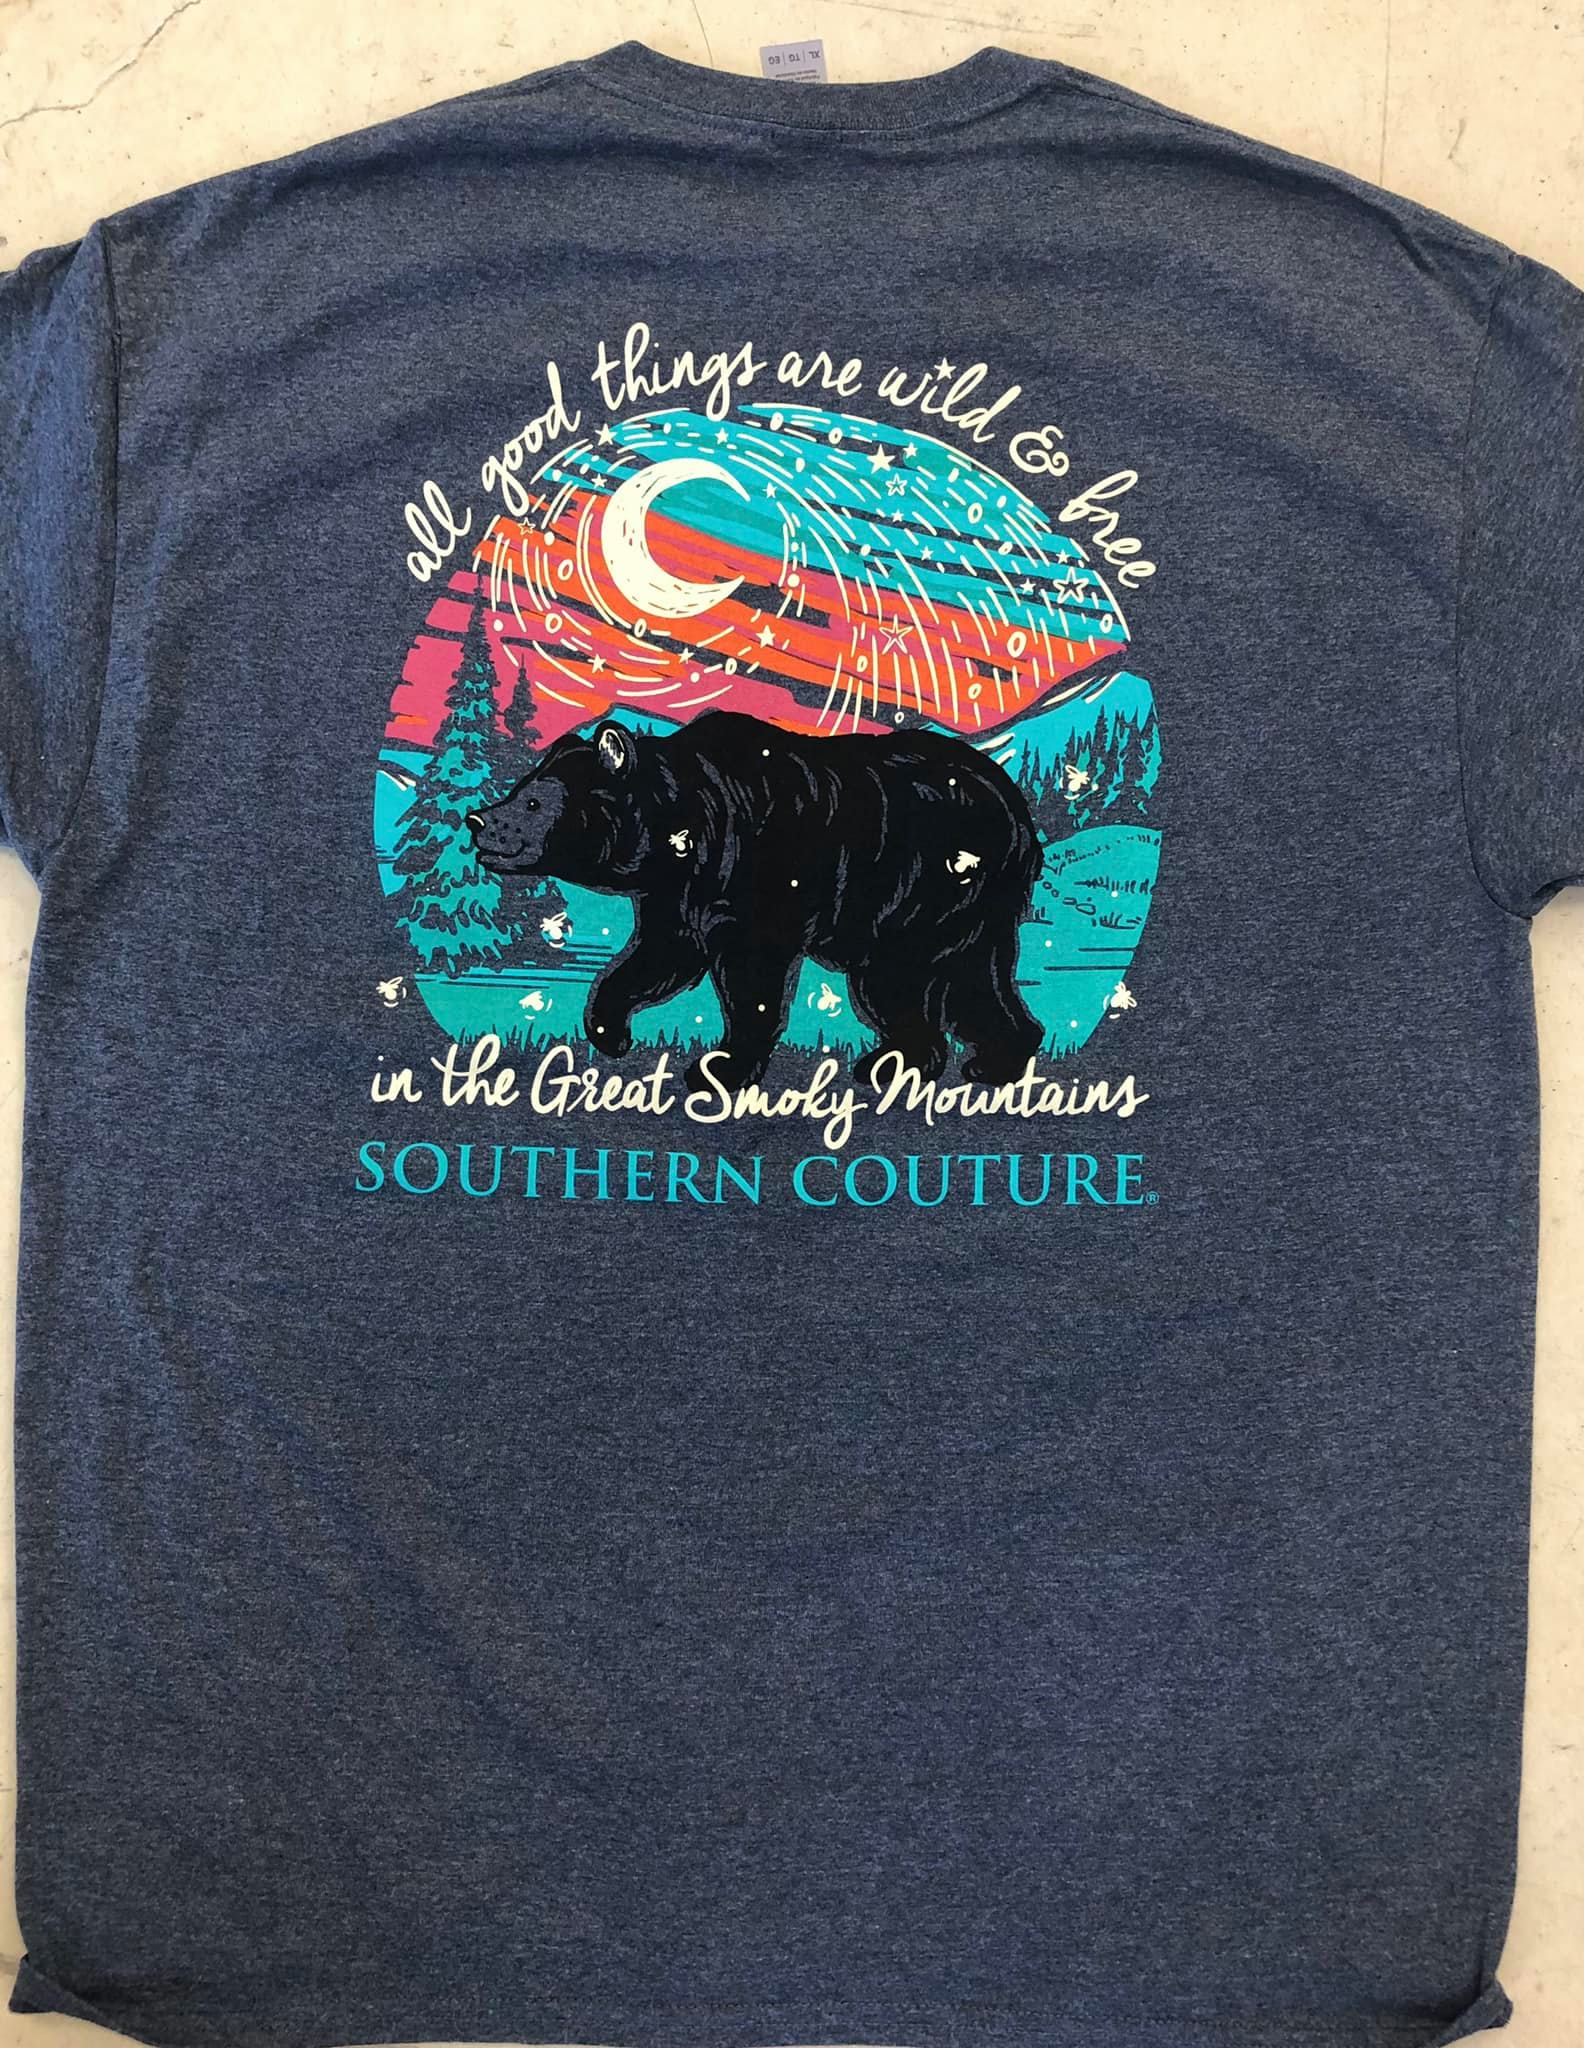 All good things are wild and free in the great smoky mountains sounthern couture